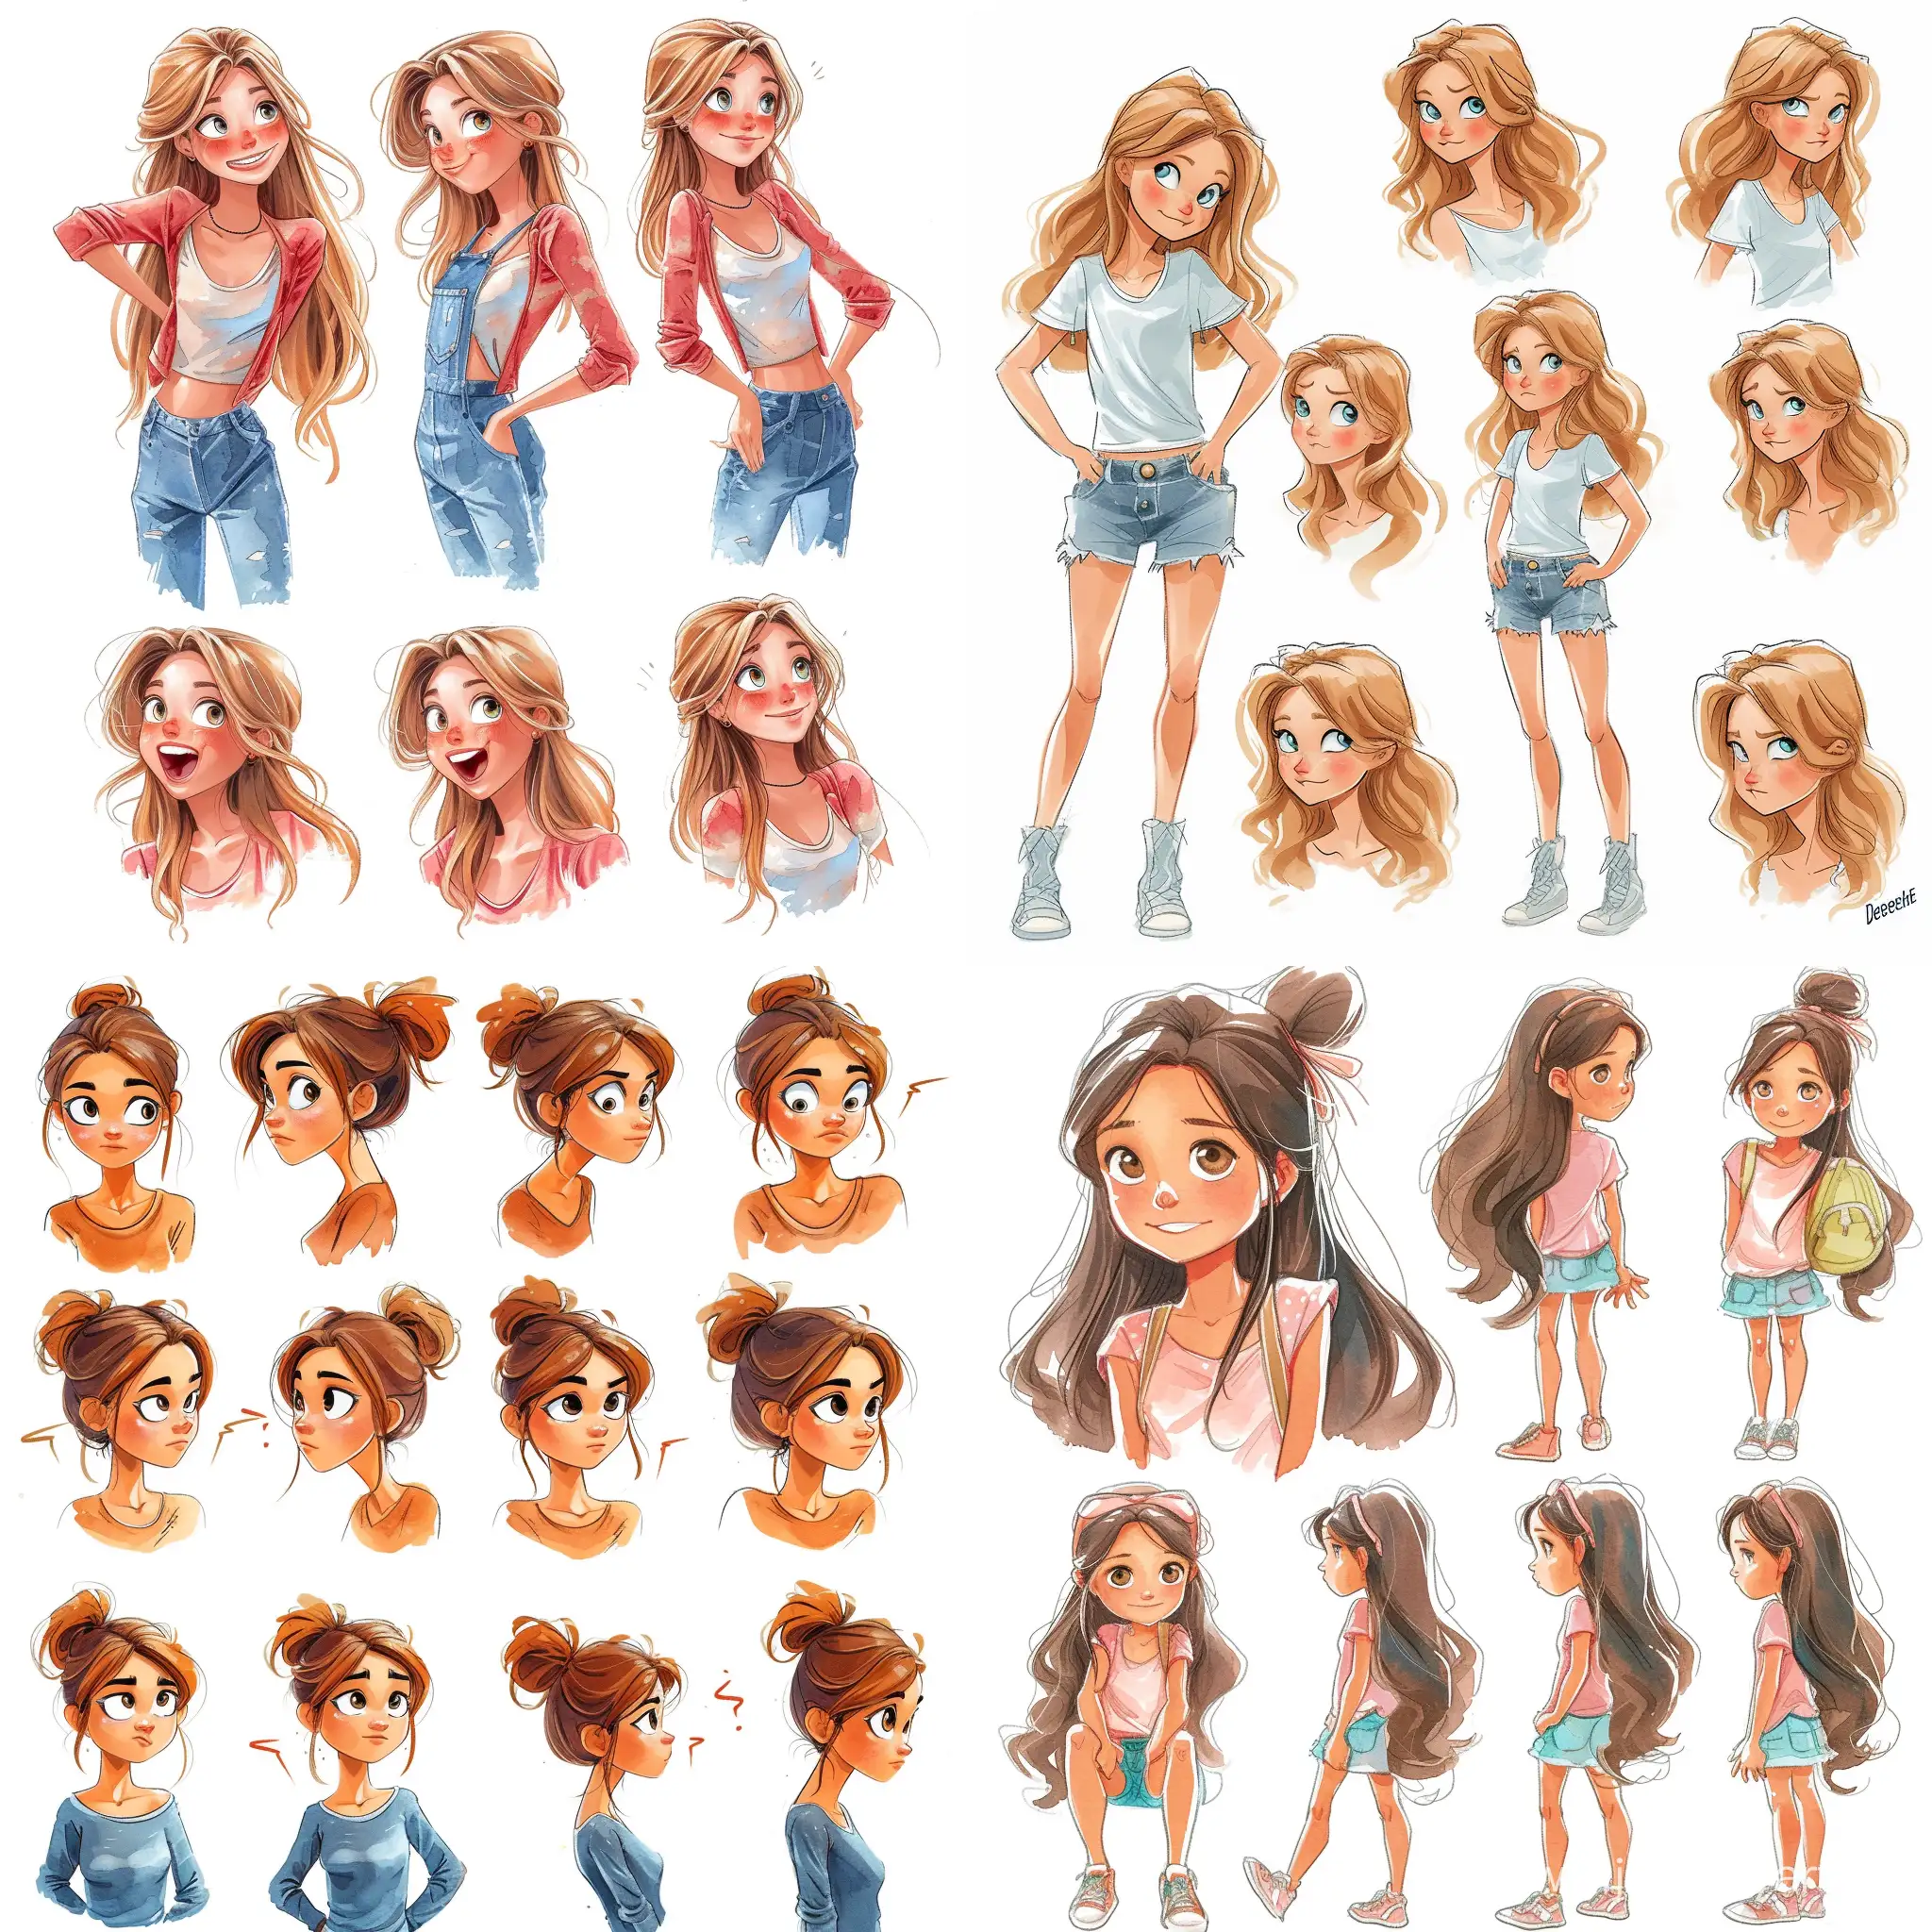 Create an Kids book Character, Illustration of a Teenage Topmodel, watercolor Style, in the Style of  topmodel by Depesche, multiple poses and expressions